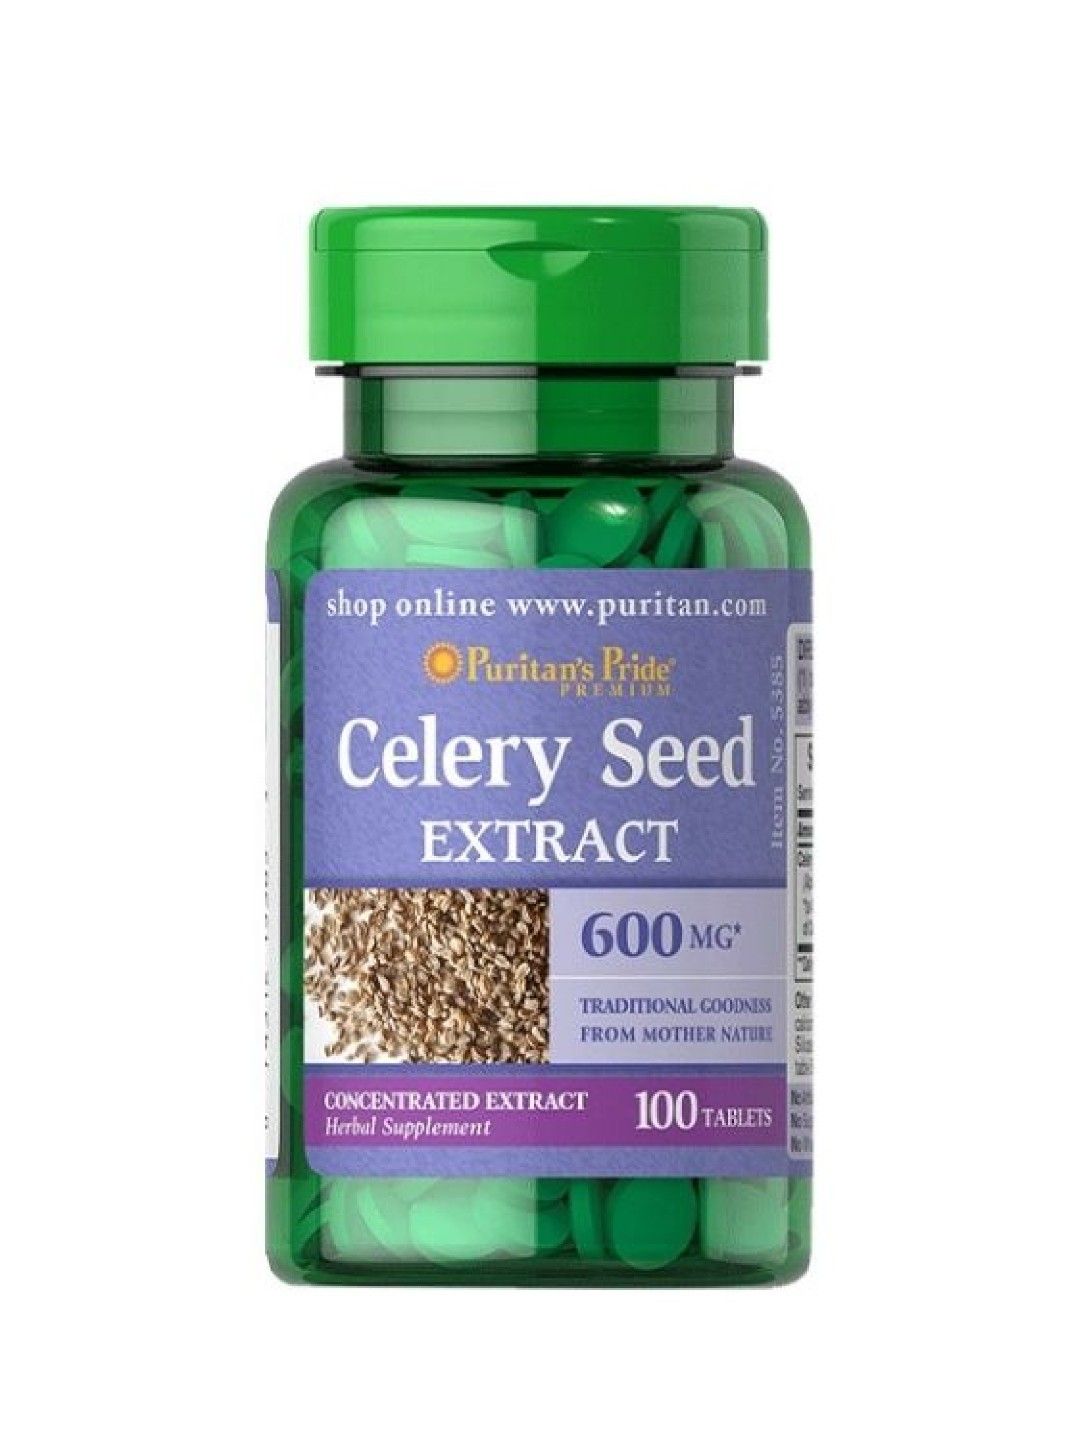 Puritan's Pride Celery Seed Extract 600 mg (100 tablets) (No Color- Image 1)